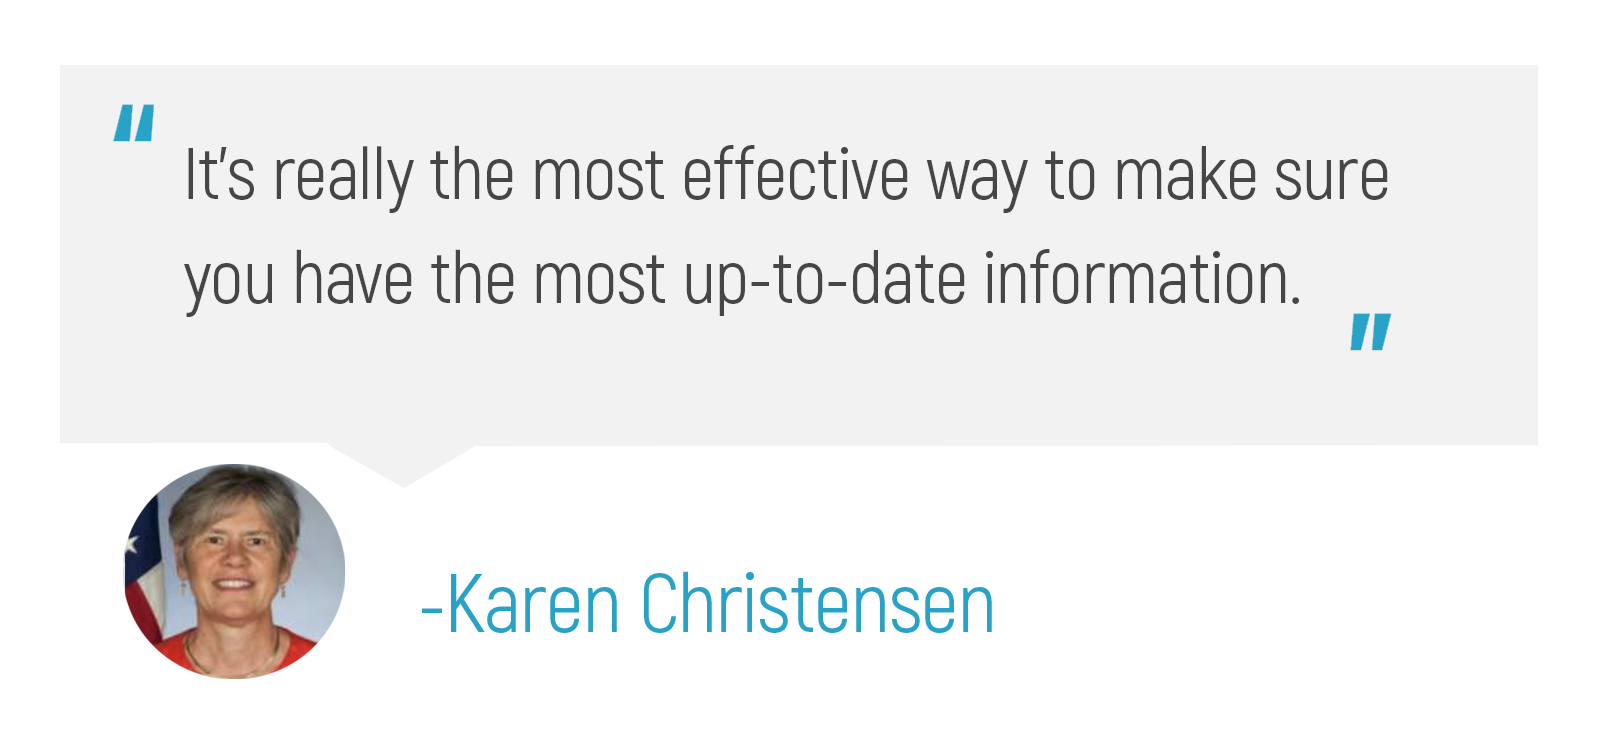 "It's really the most effective way to make sure you have the most up-to-date information."